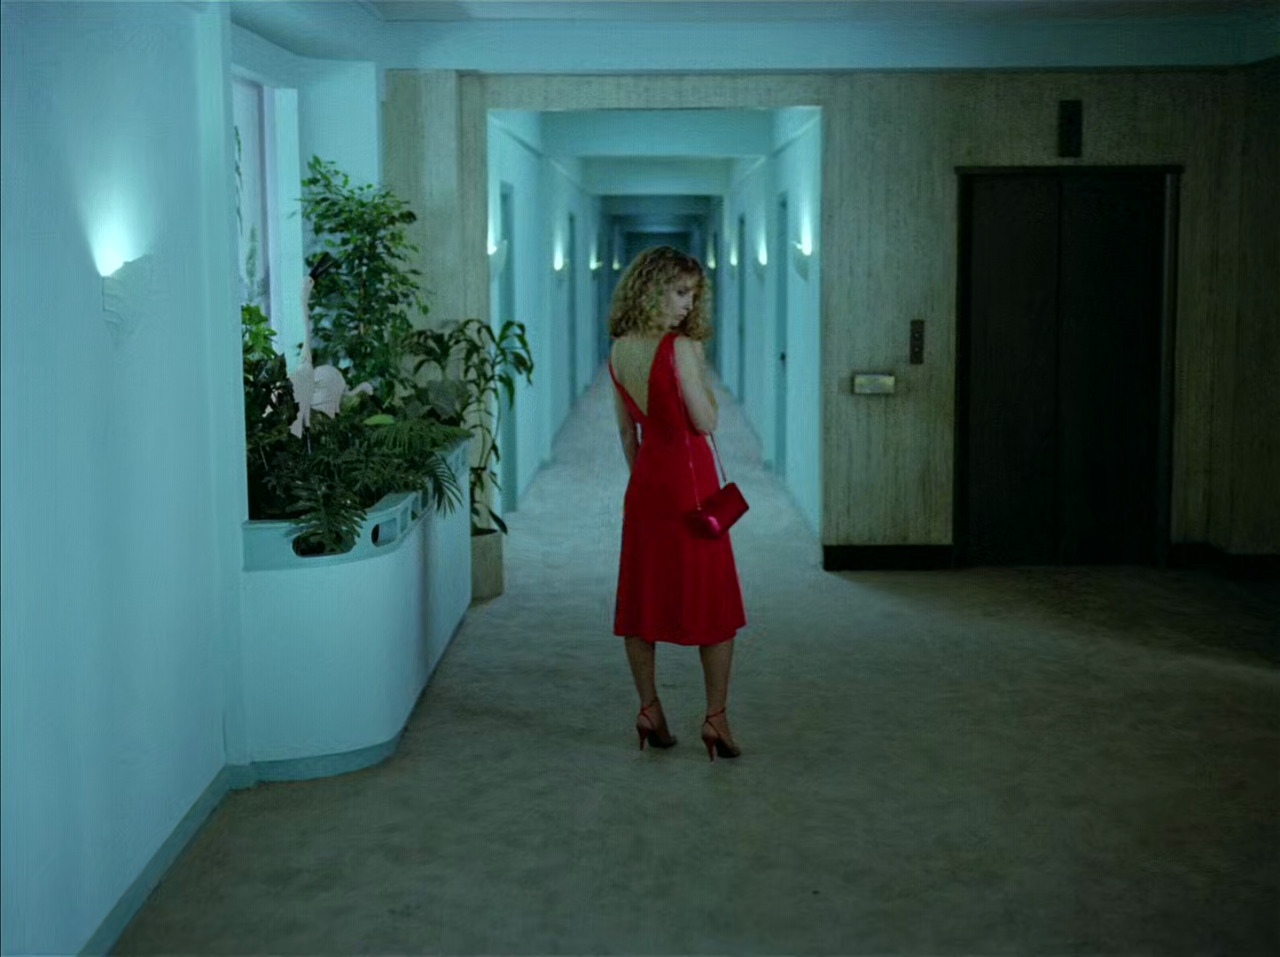 One from the Heart, Francis Ford Coppola #one from the heart  #francis ford coppola #teri garr#1981#1980s#80s#tom waits#apartment#aesthetic#red dress#cinema#cinematography#screencaps#stills#usa